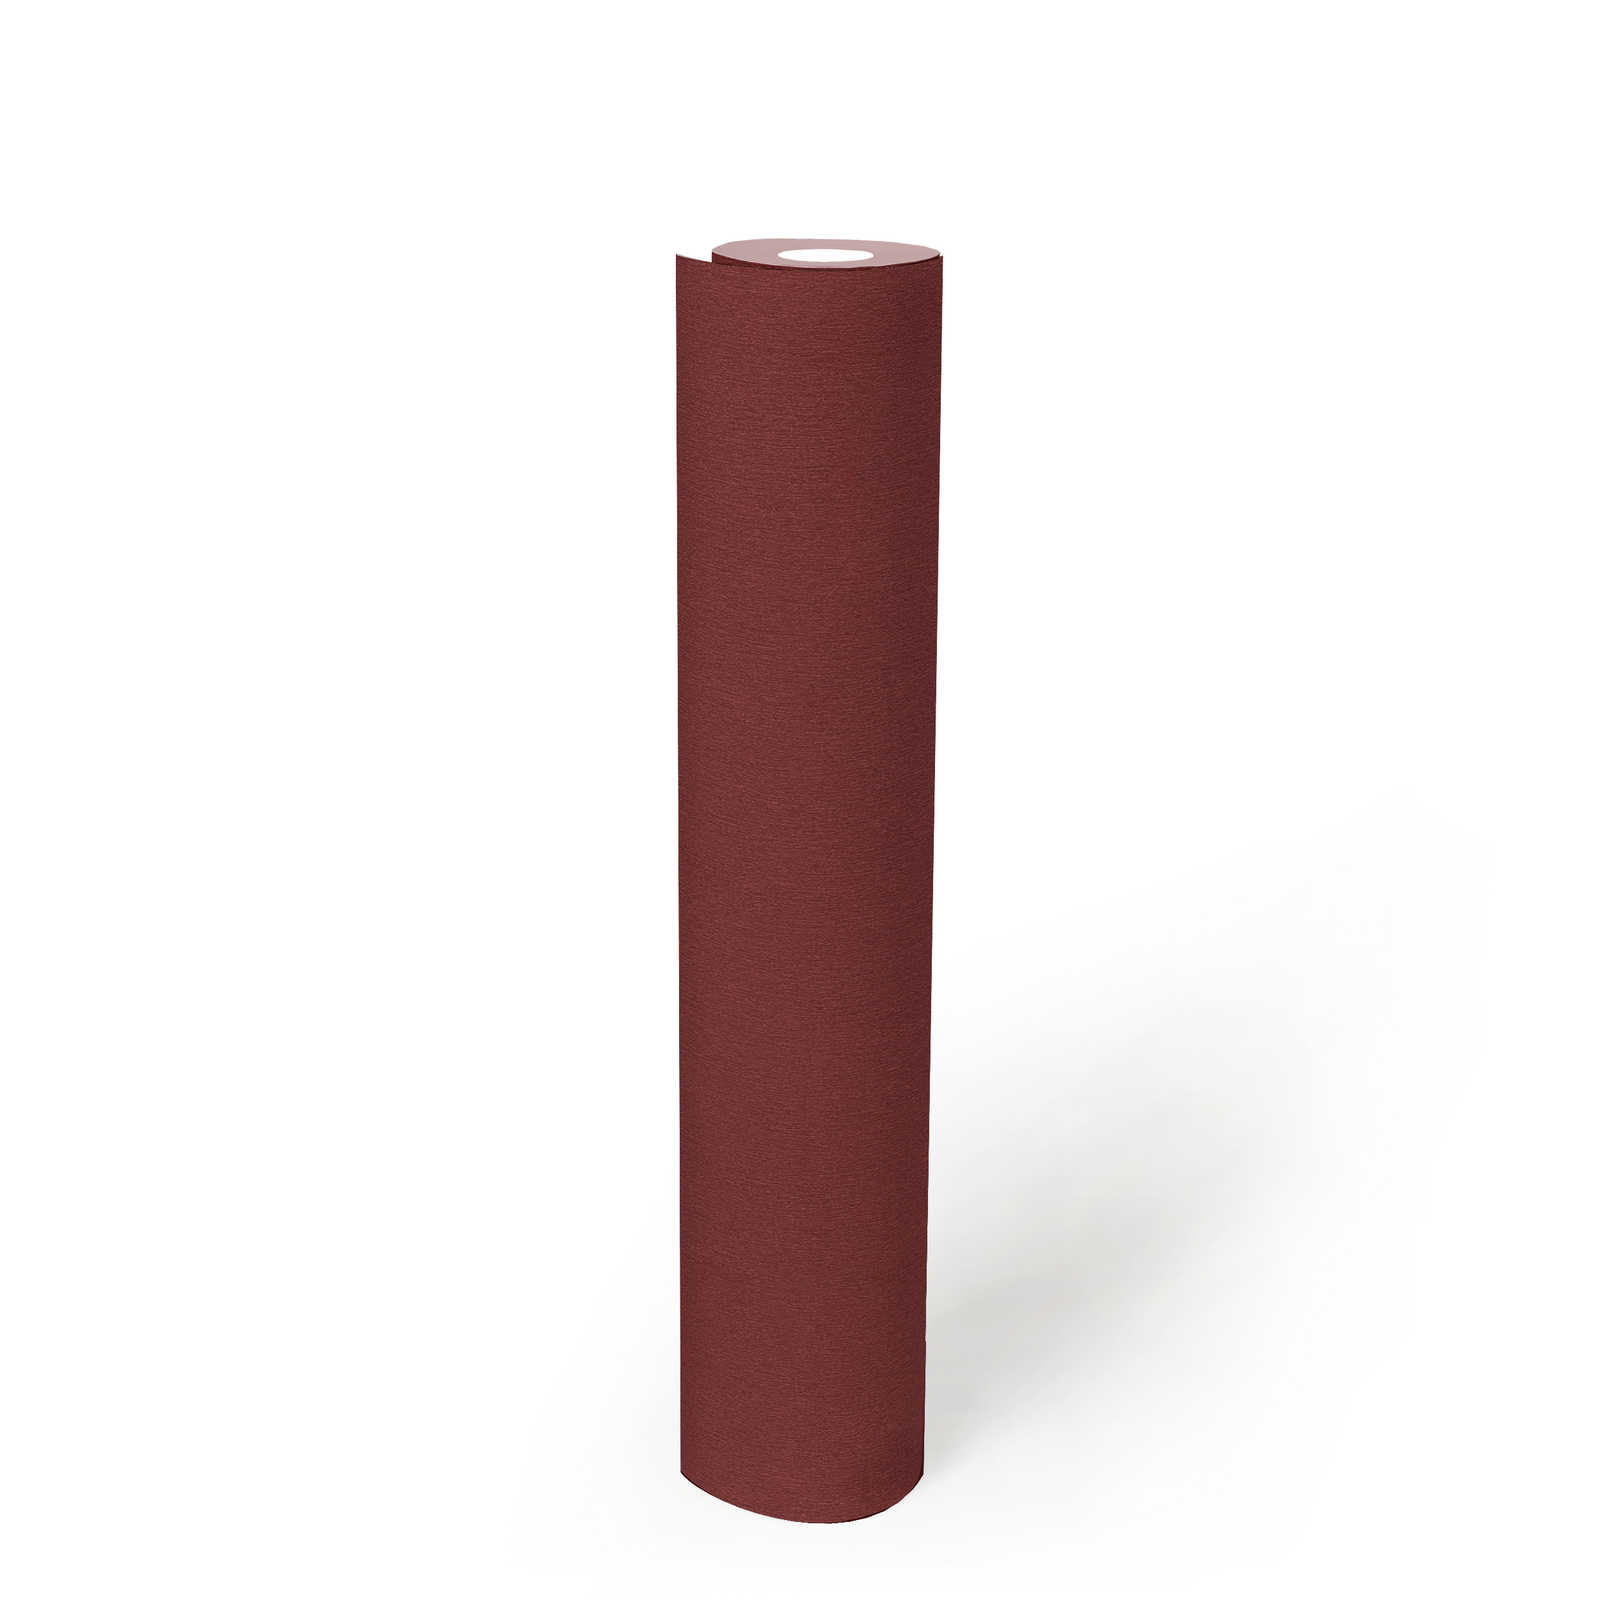             Wallpaper bordeaux red with colour structure - dark red
        